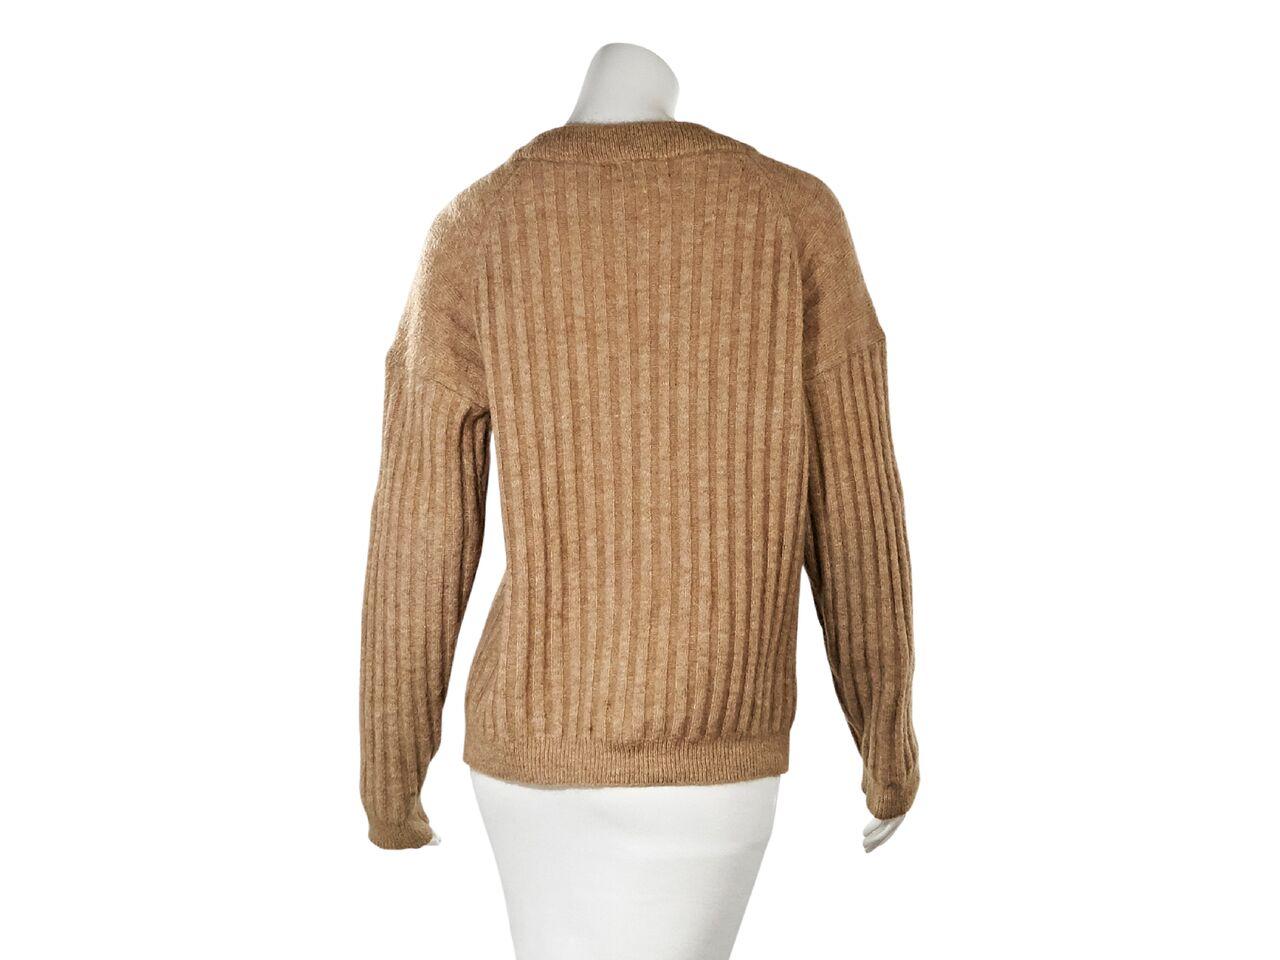 Product details:  Tan mohair-blend ribbed sweater by Acne Studios.  Jewelneck.  Long sleeves.  Pullover style.  39